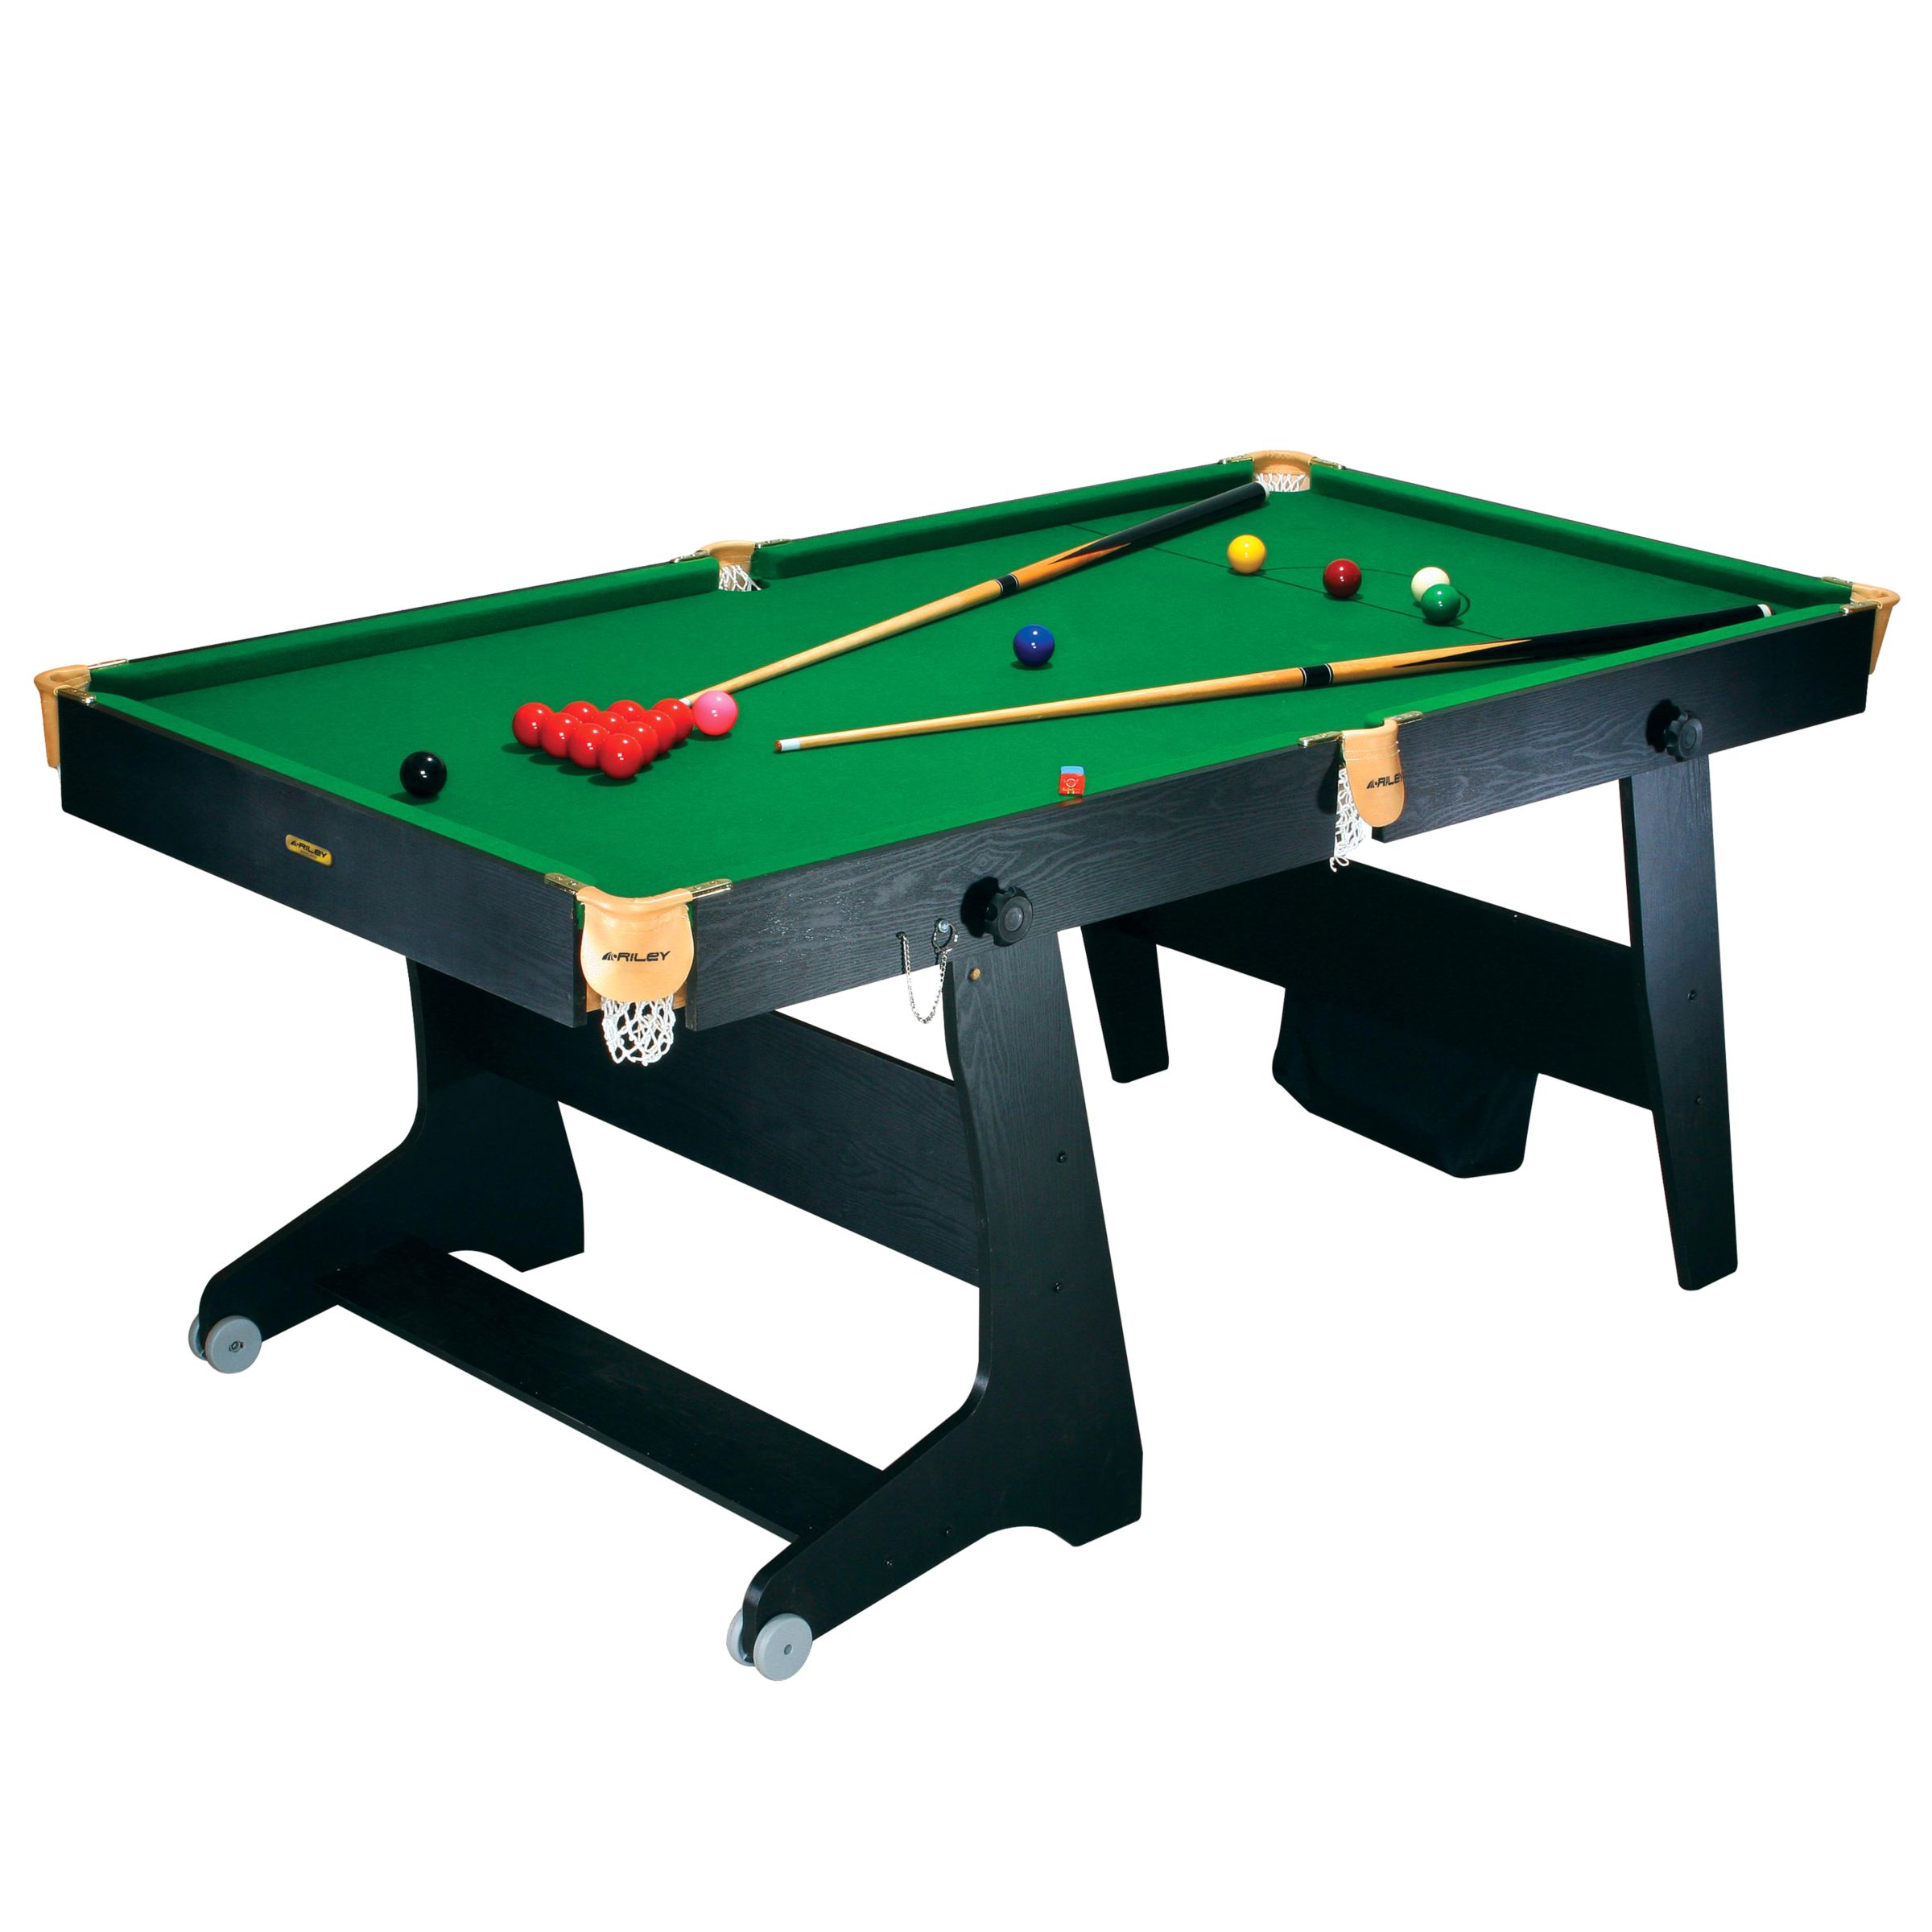 Riley 6ft Folding Cue Sports Pool and Snooker Table at JohnLewis